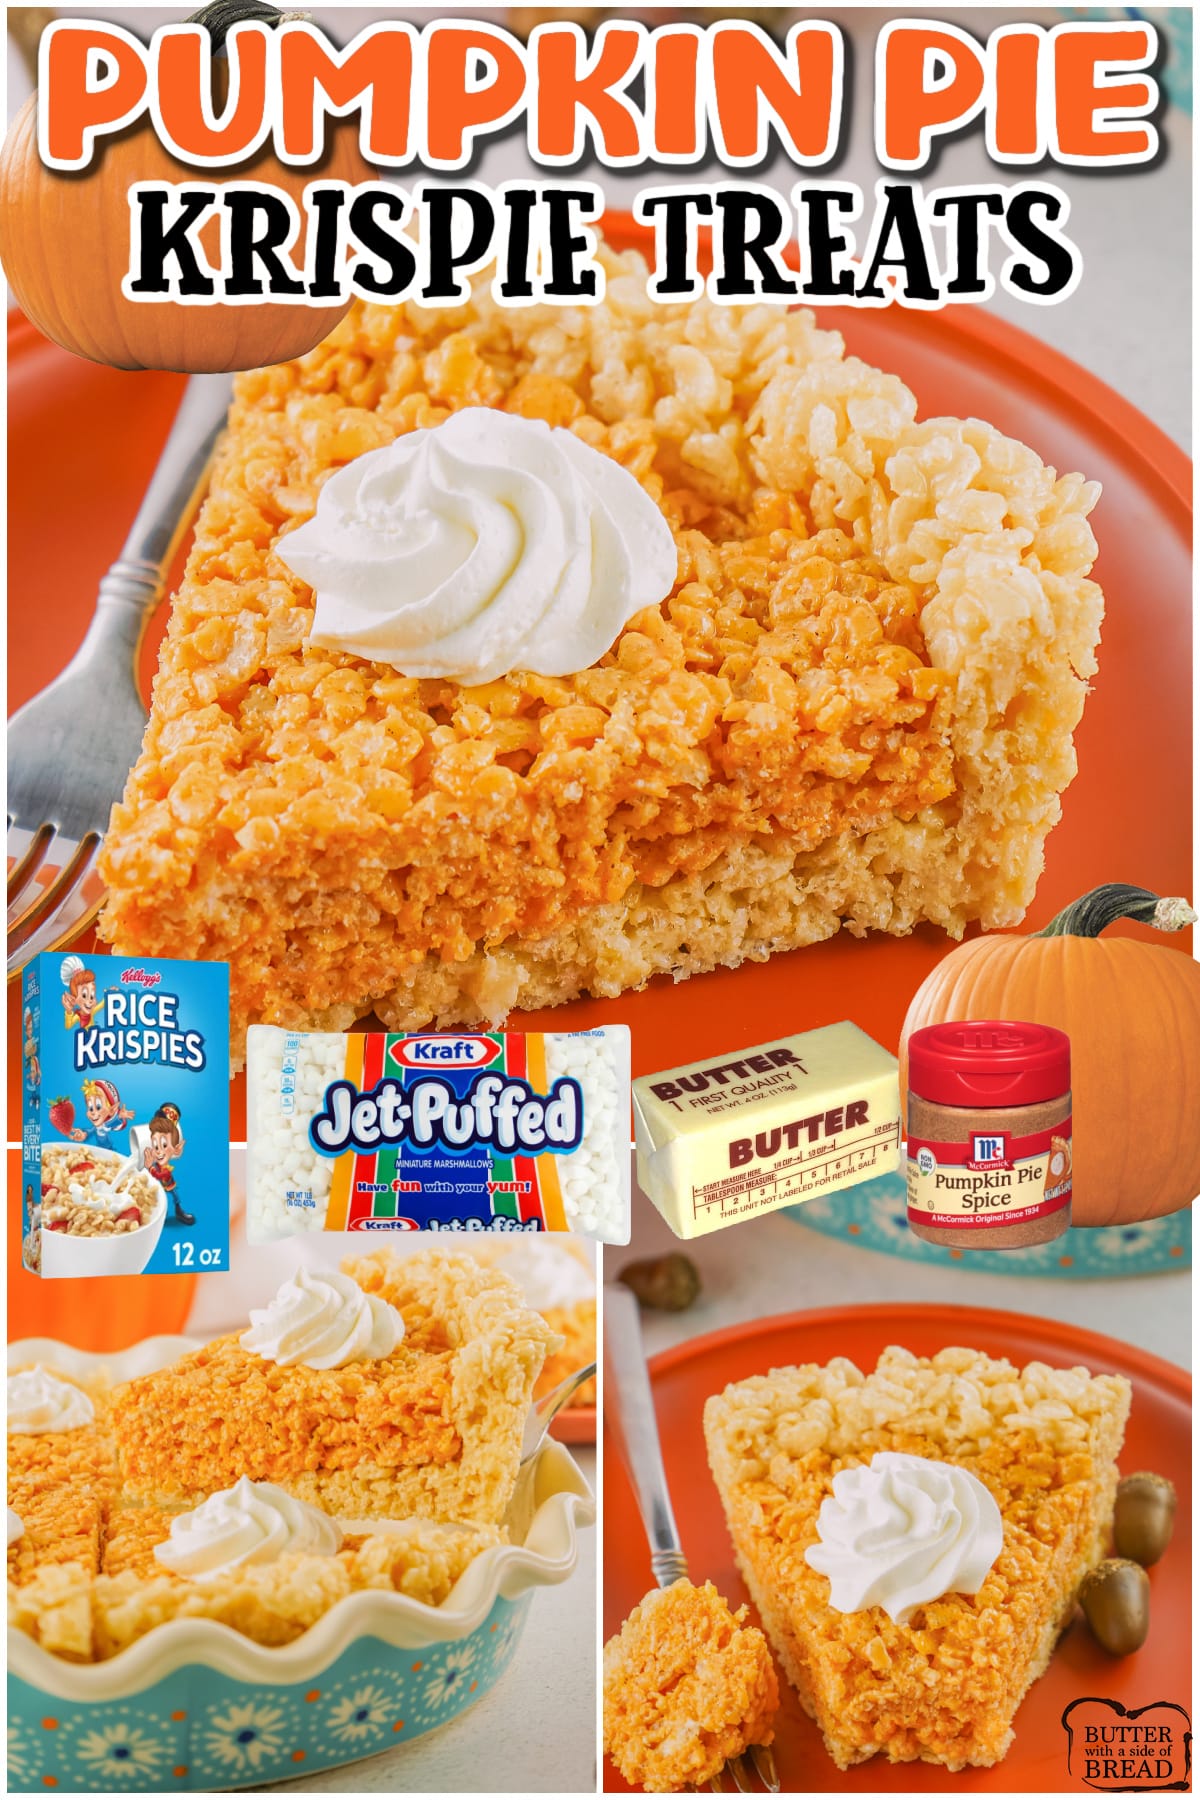 Pumpkin Pie Krispie Treats are a festive addition to your Thanksgiving feast! These rice krispie pumpkin treats are a deliciously spiced with pumpkin flavor we all love!